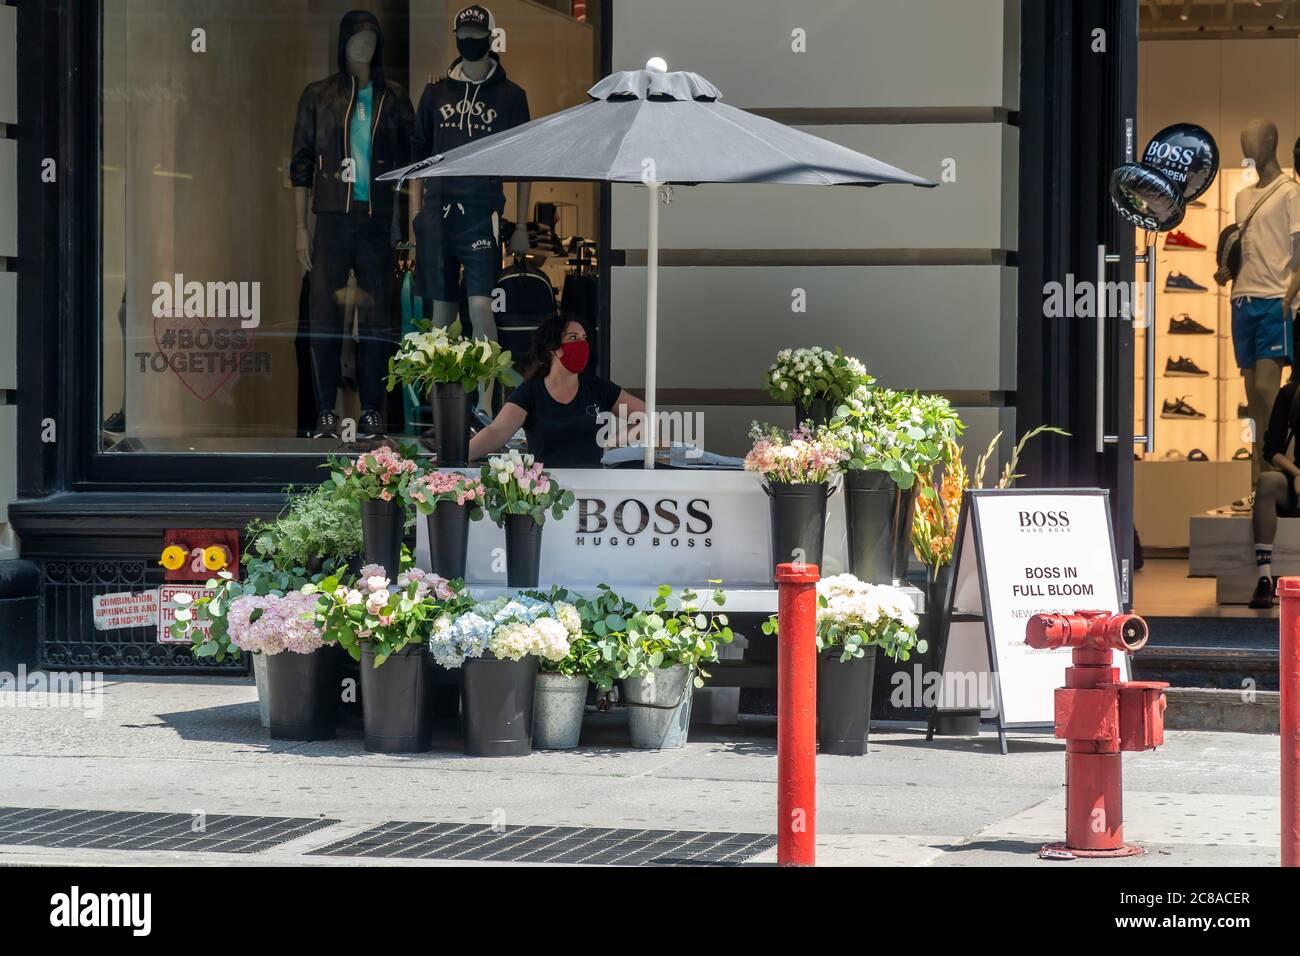 Hugo Boss Store High Resolution Stock Photography and Images - Alamy